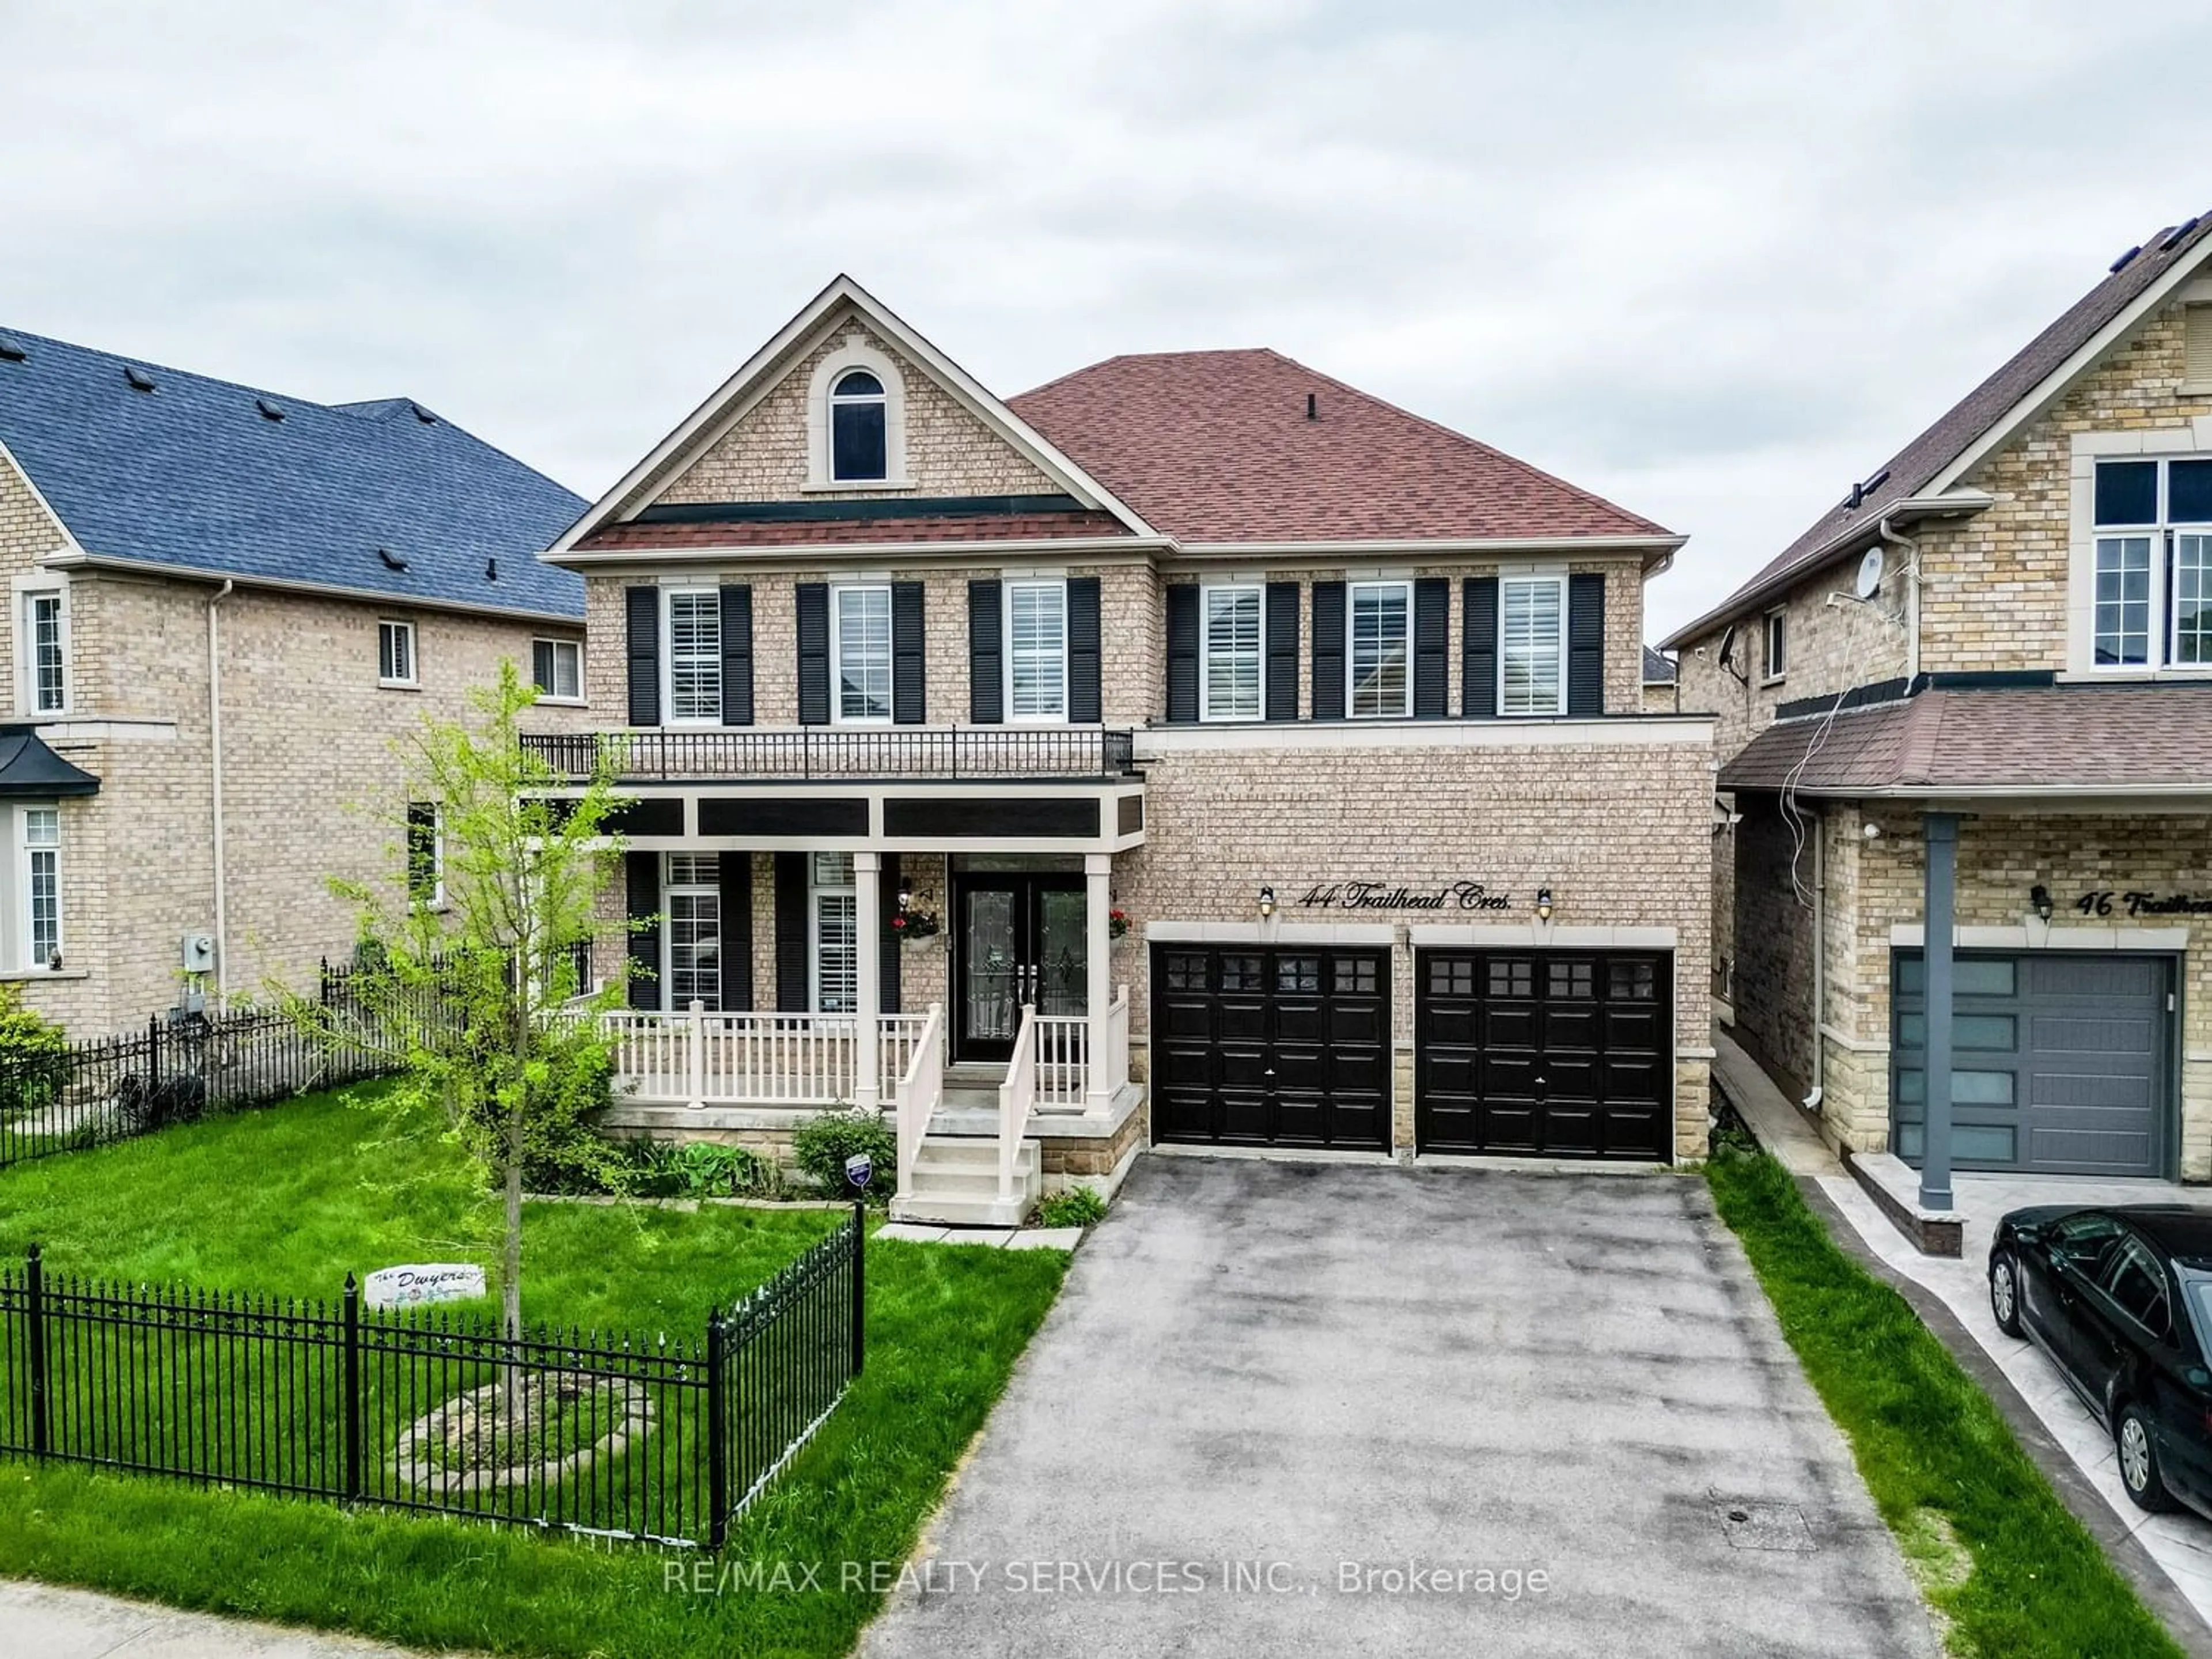 Home with brick exterior material for 44 Trailhead Cres, Brampton Ontario L6R 3H3